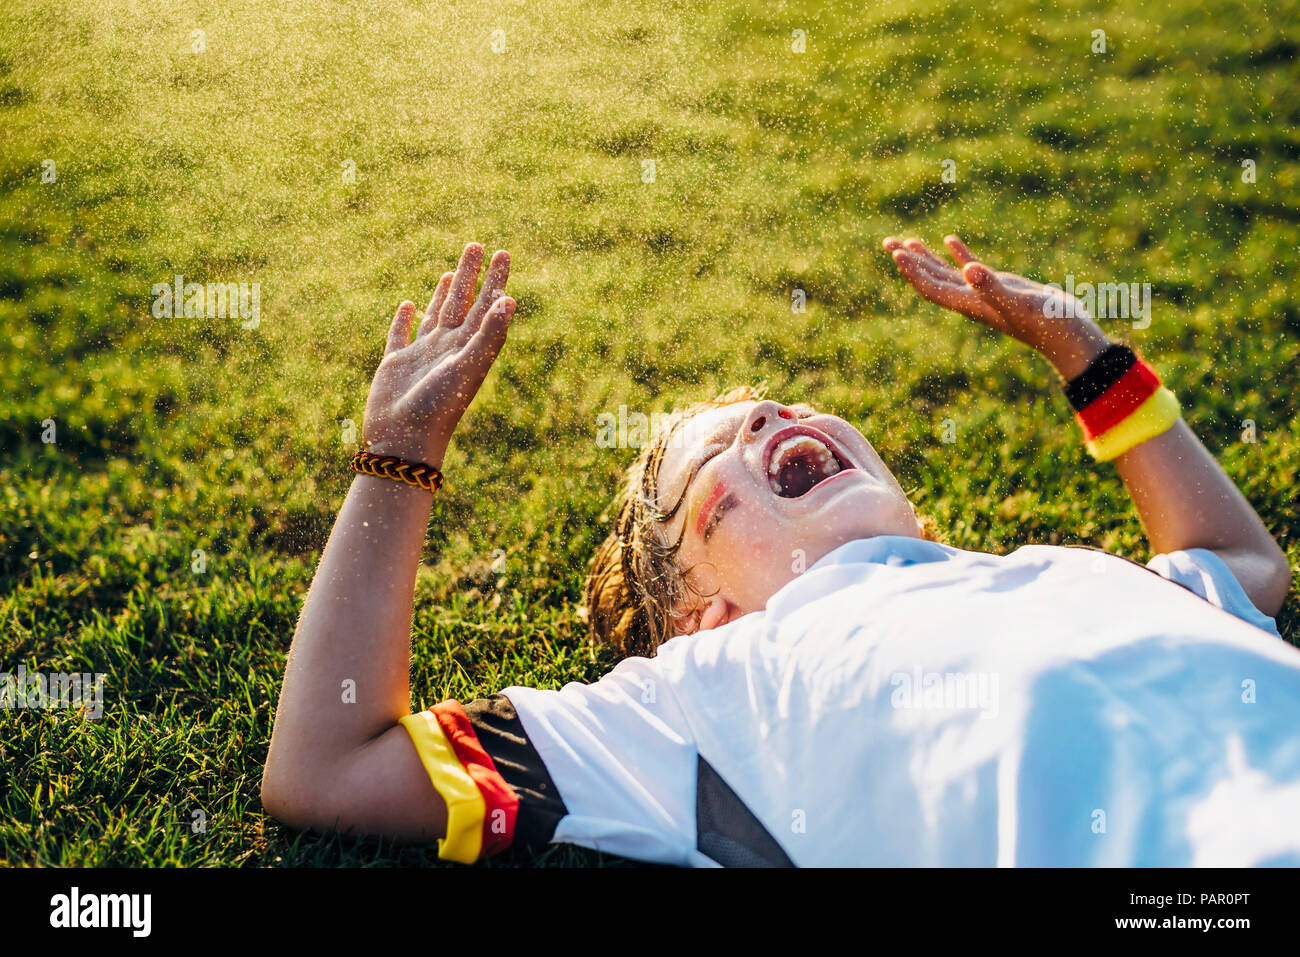 Boy in German soccer shirt lying on grass, laughing and screaming Stock Photo